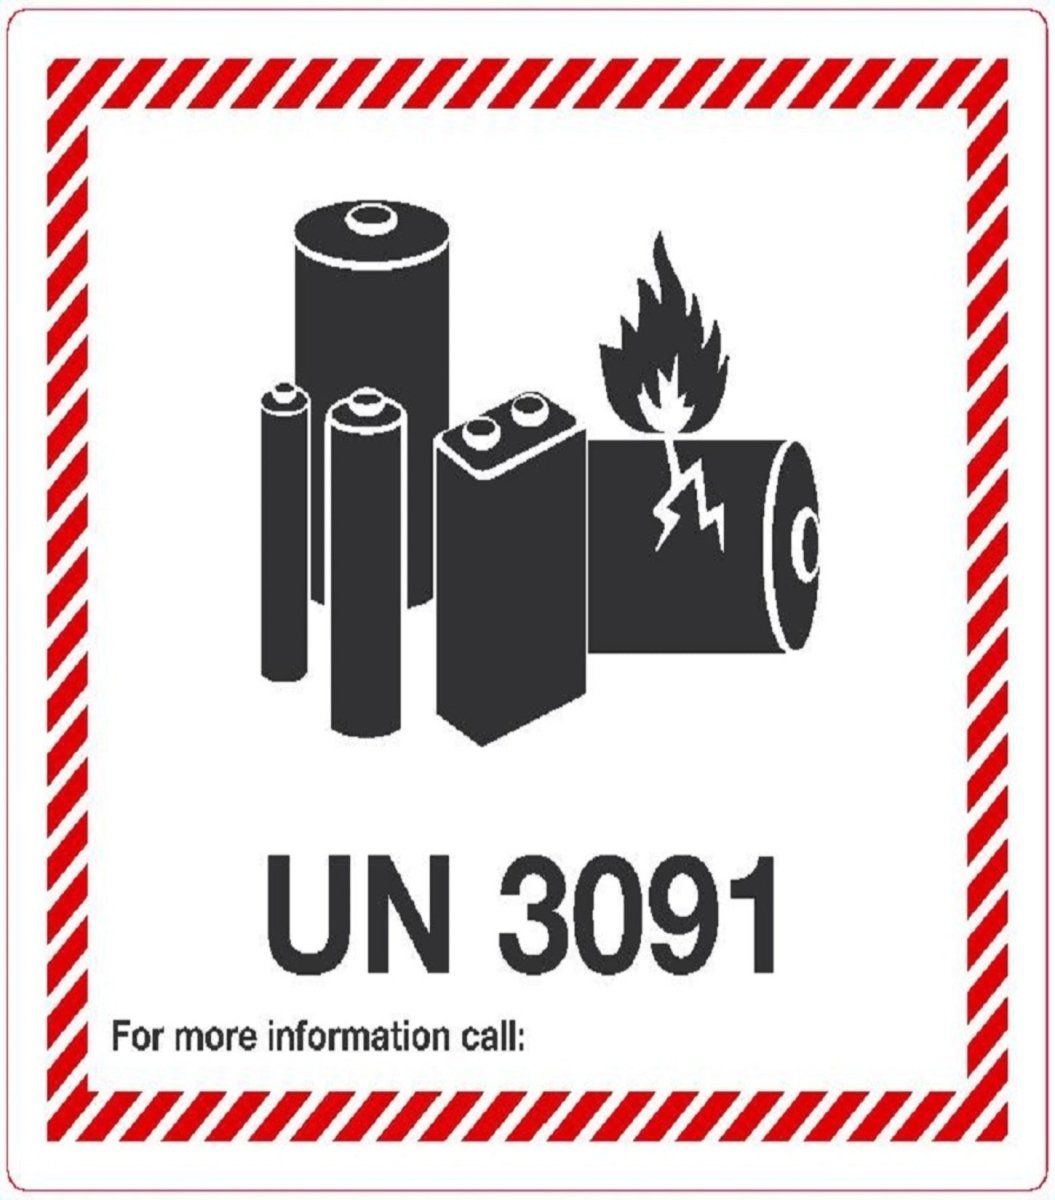 Lithium Battery marking UN 3091 Incl. Telephone number - SGS Netherlands